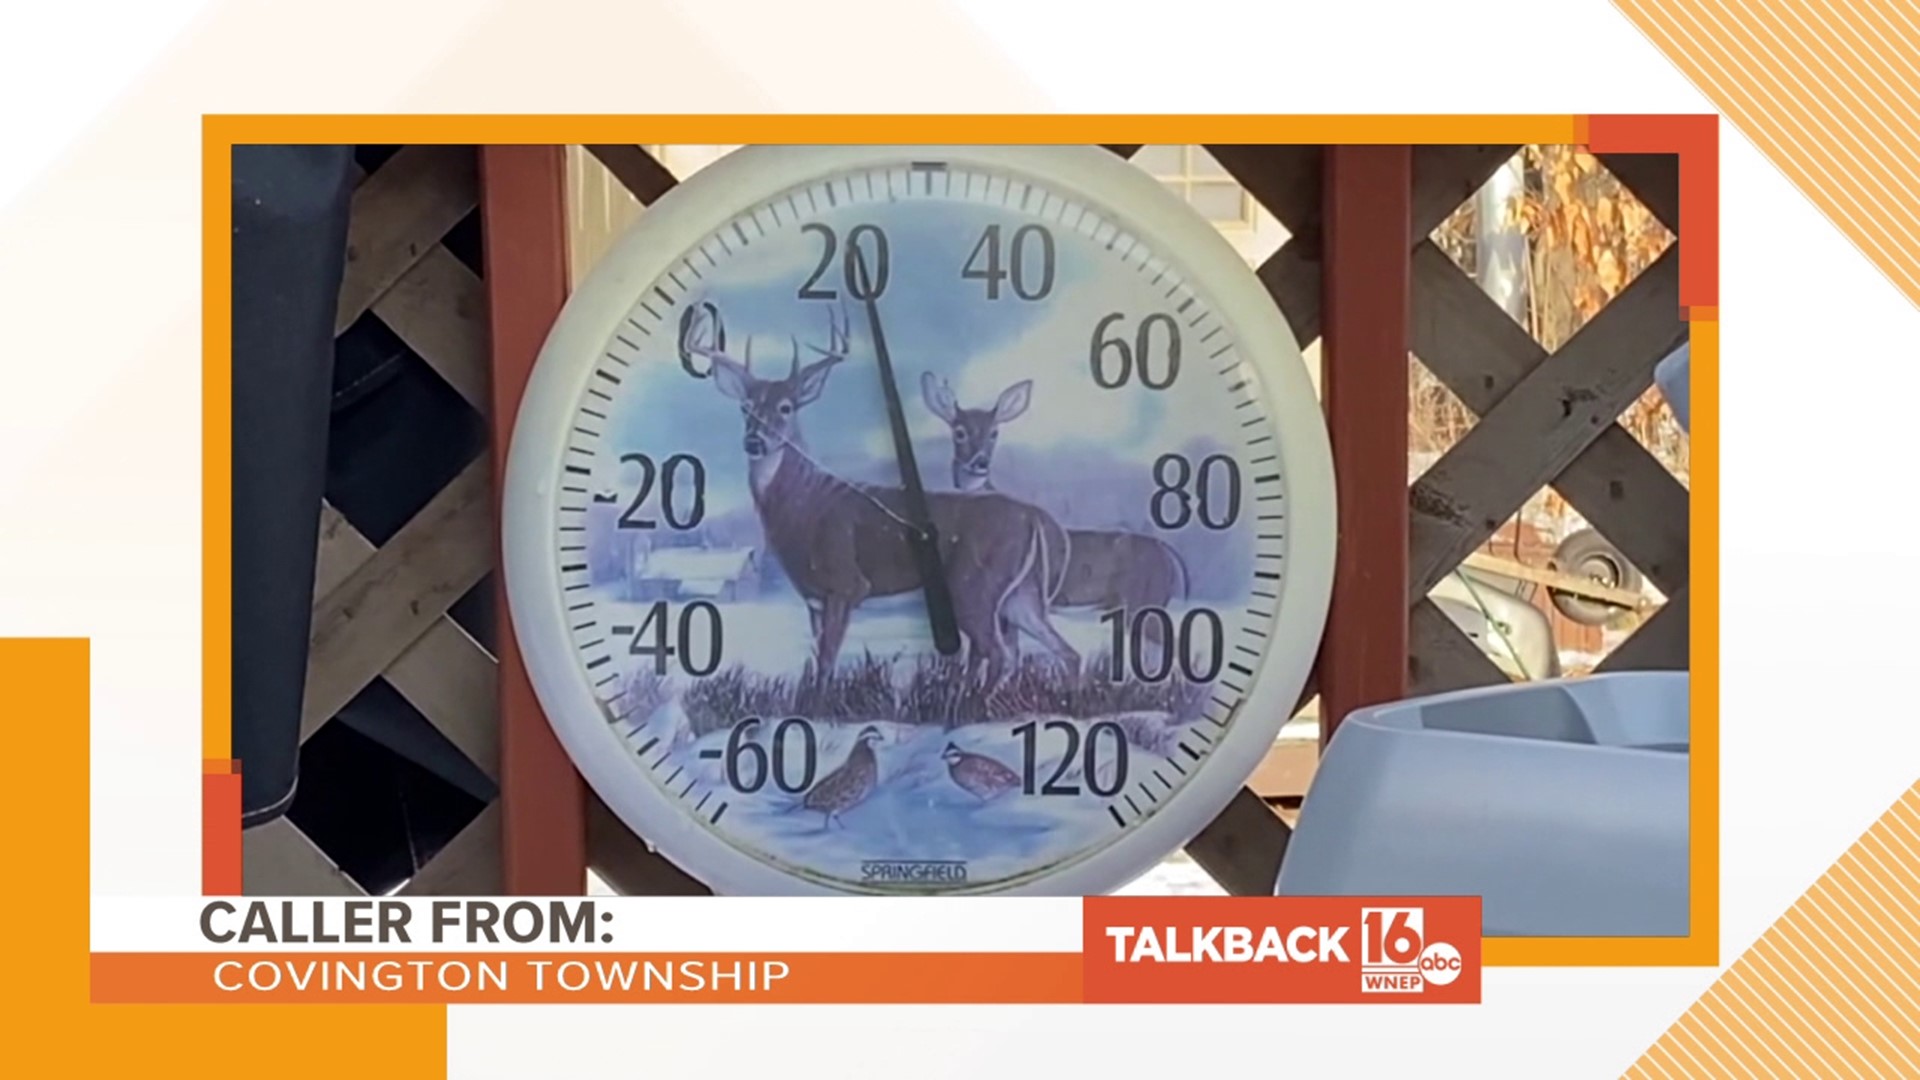 In this Talkback 16, callers have mixed feelings about the recent cold temperatures.